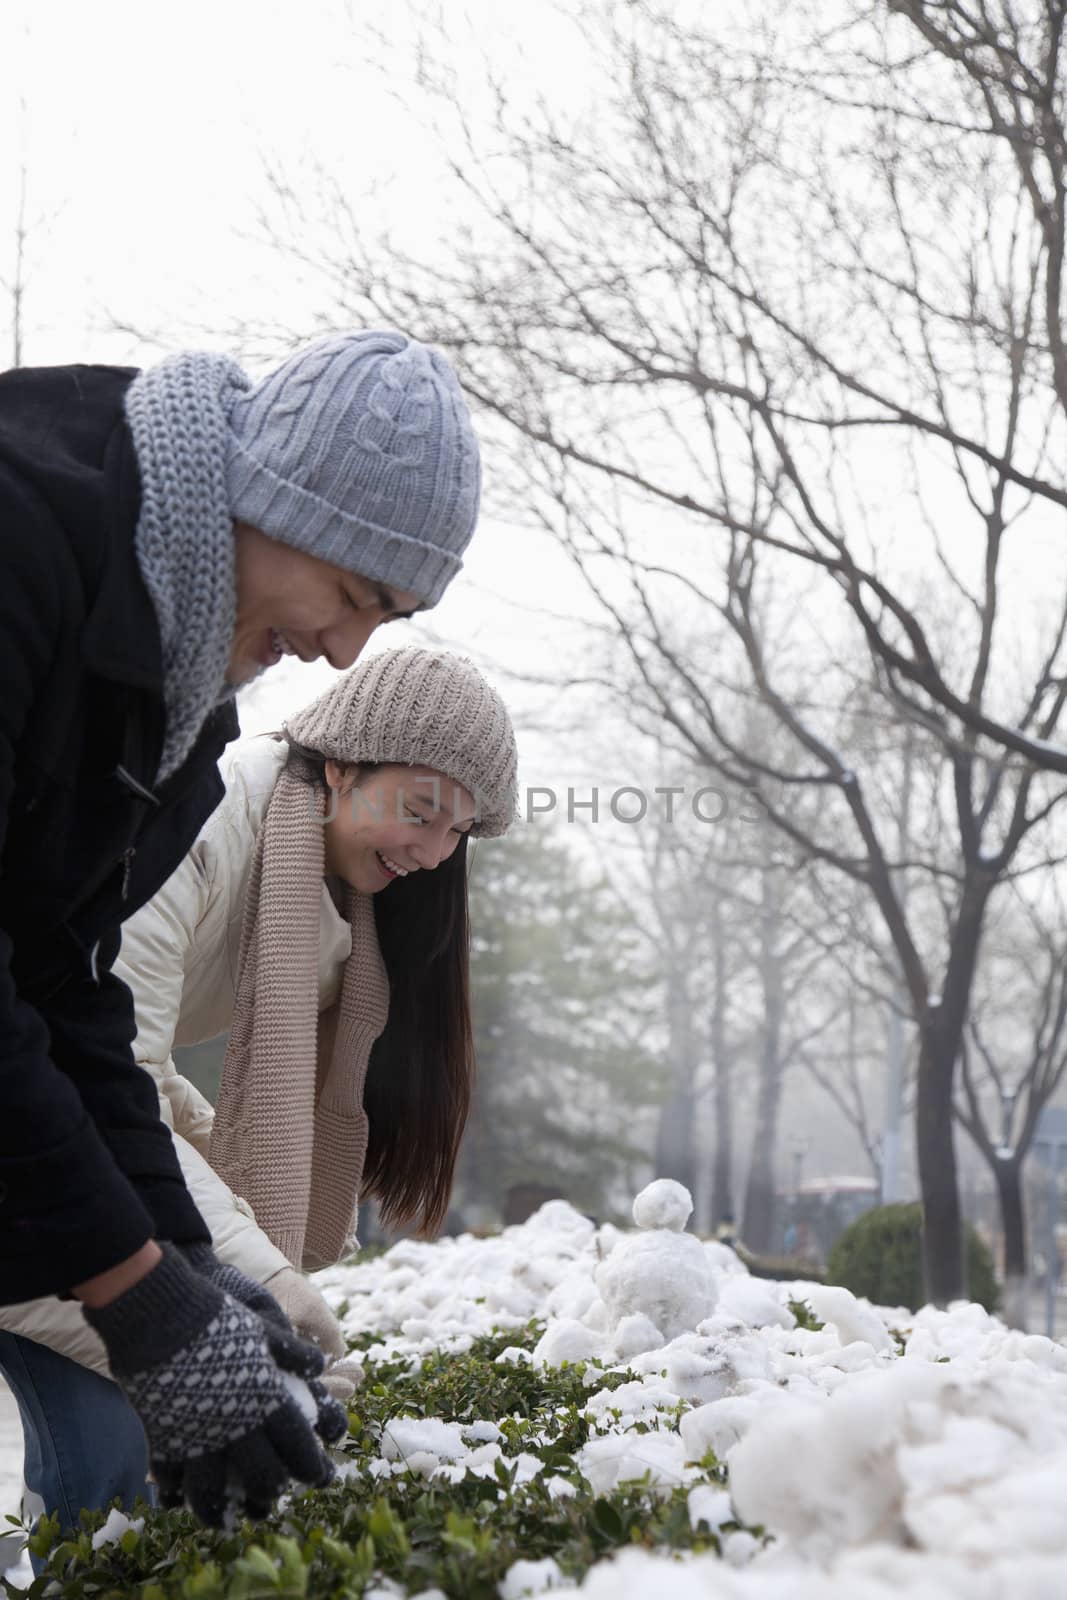 Couple Playing in the Snow